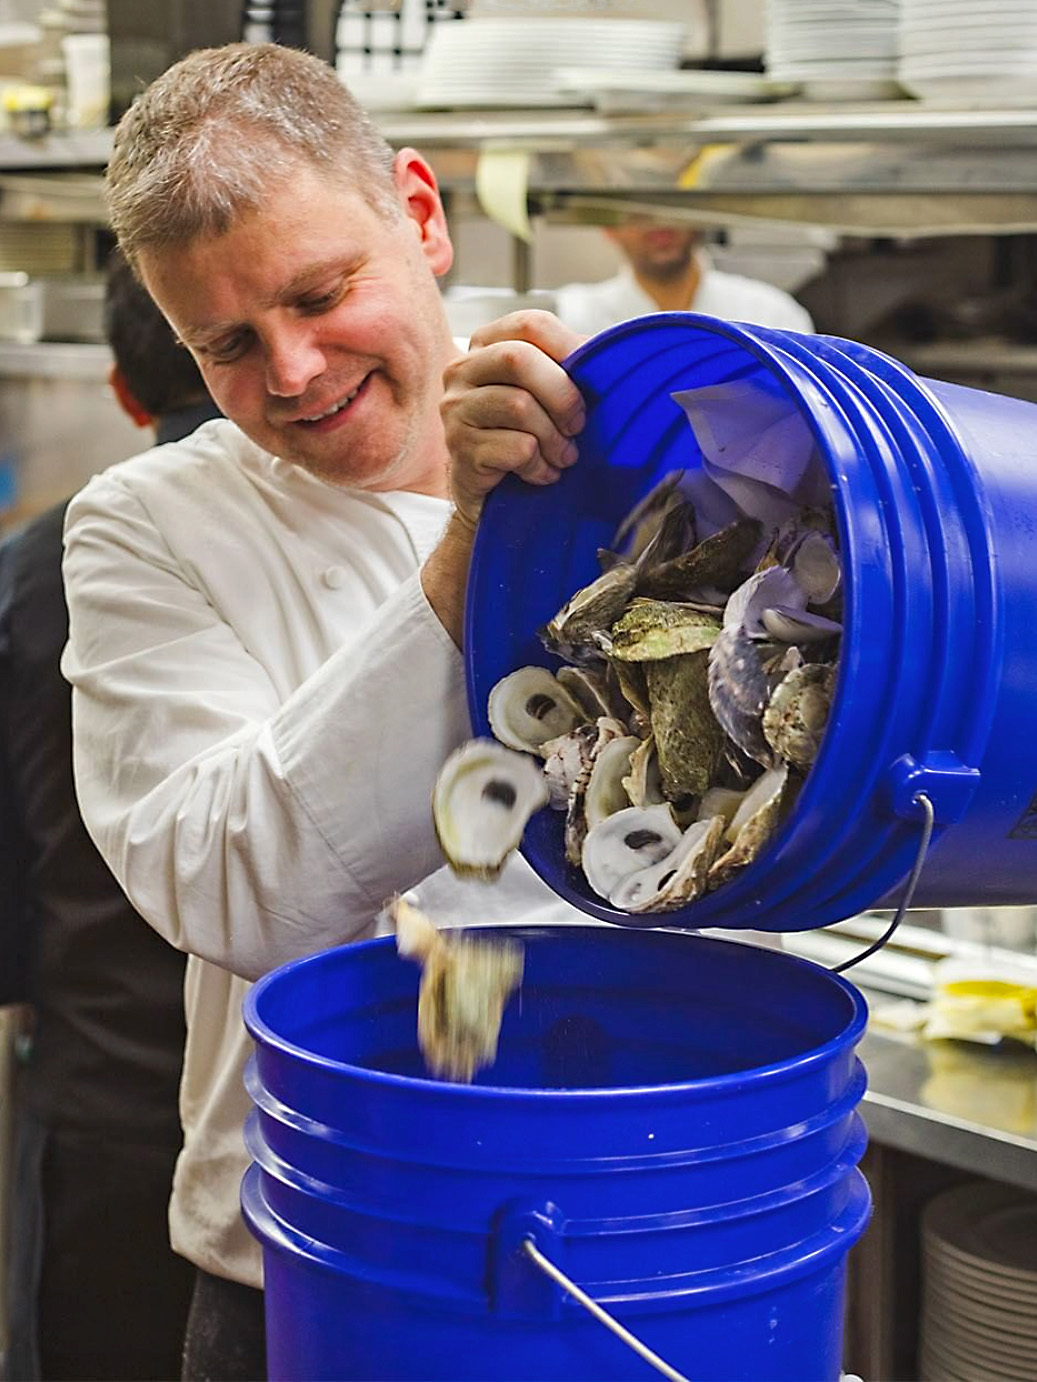 A New York chef pours oyster shells from one bucket into another. The shells will be collected and recycled by the Billion Oyster Project.